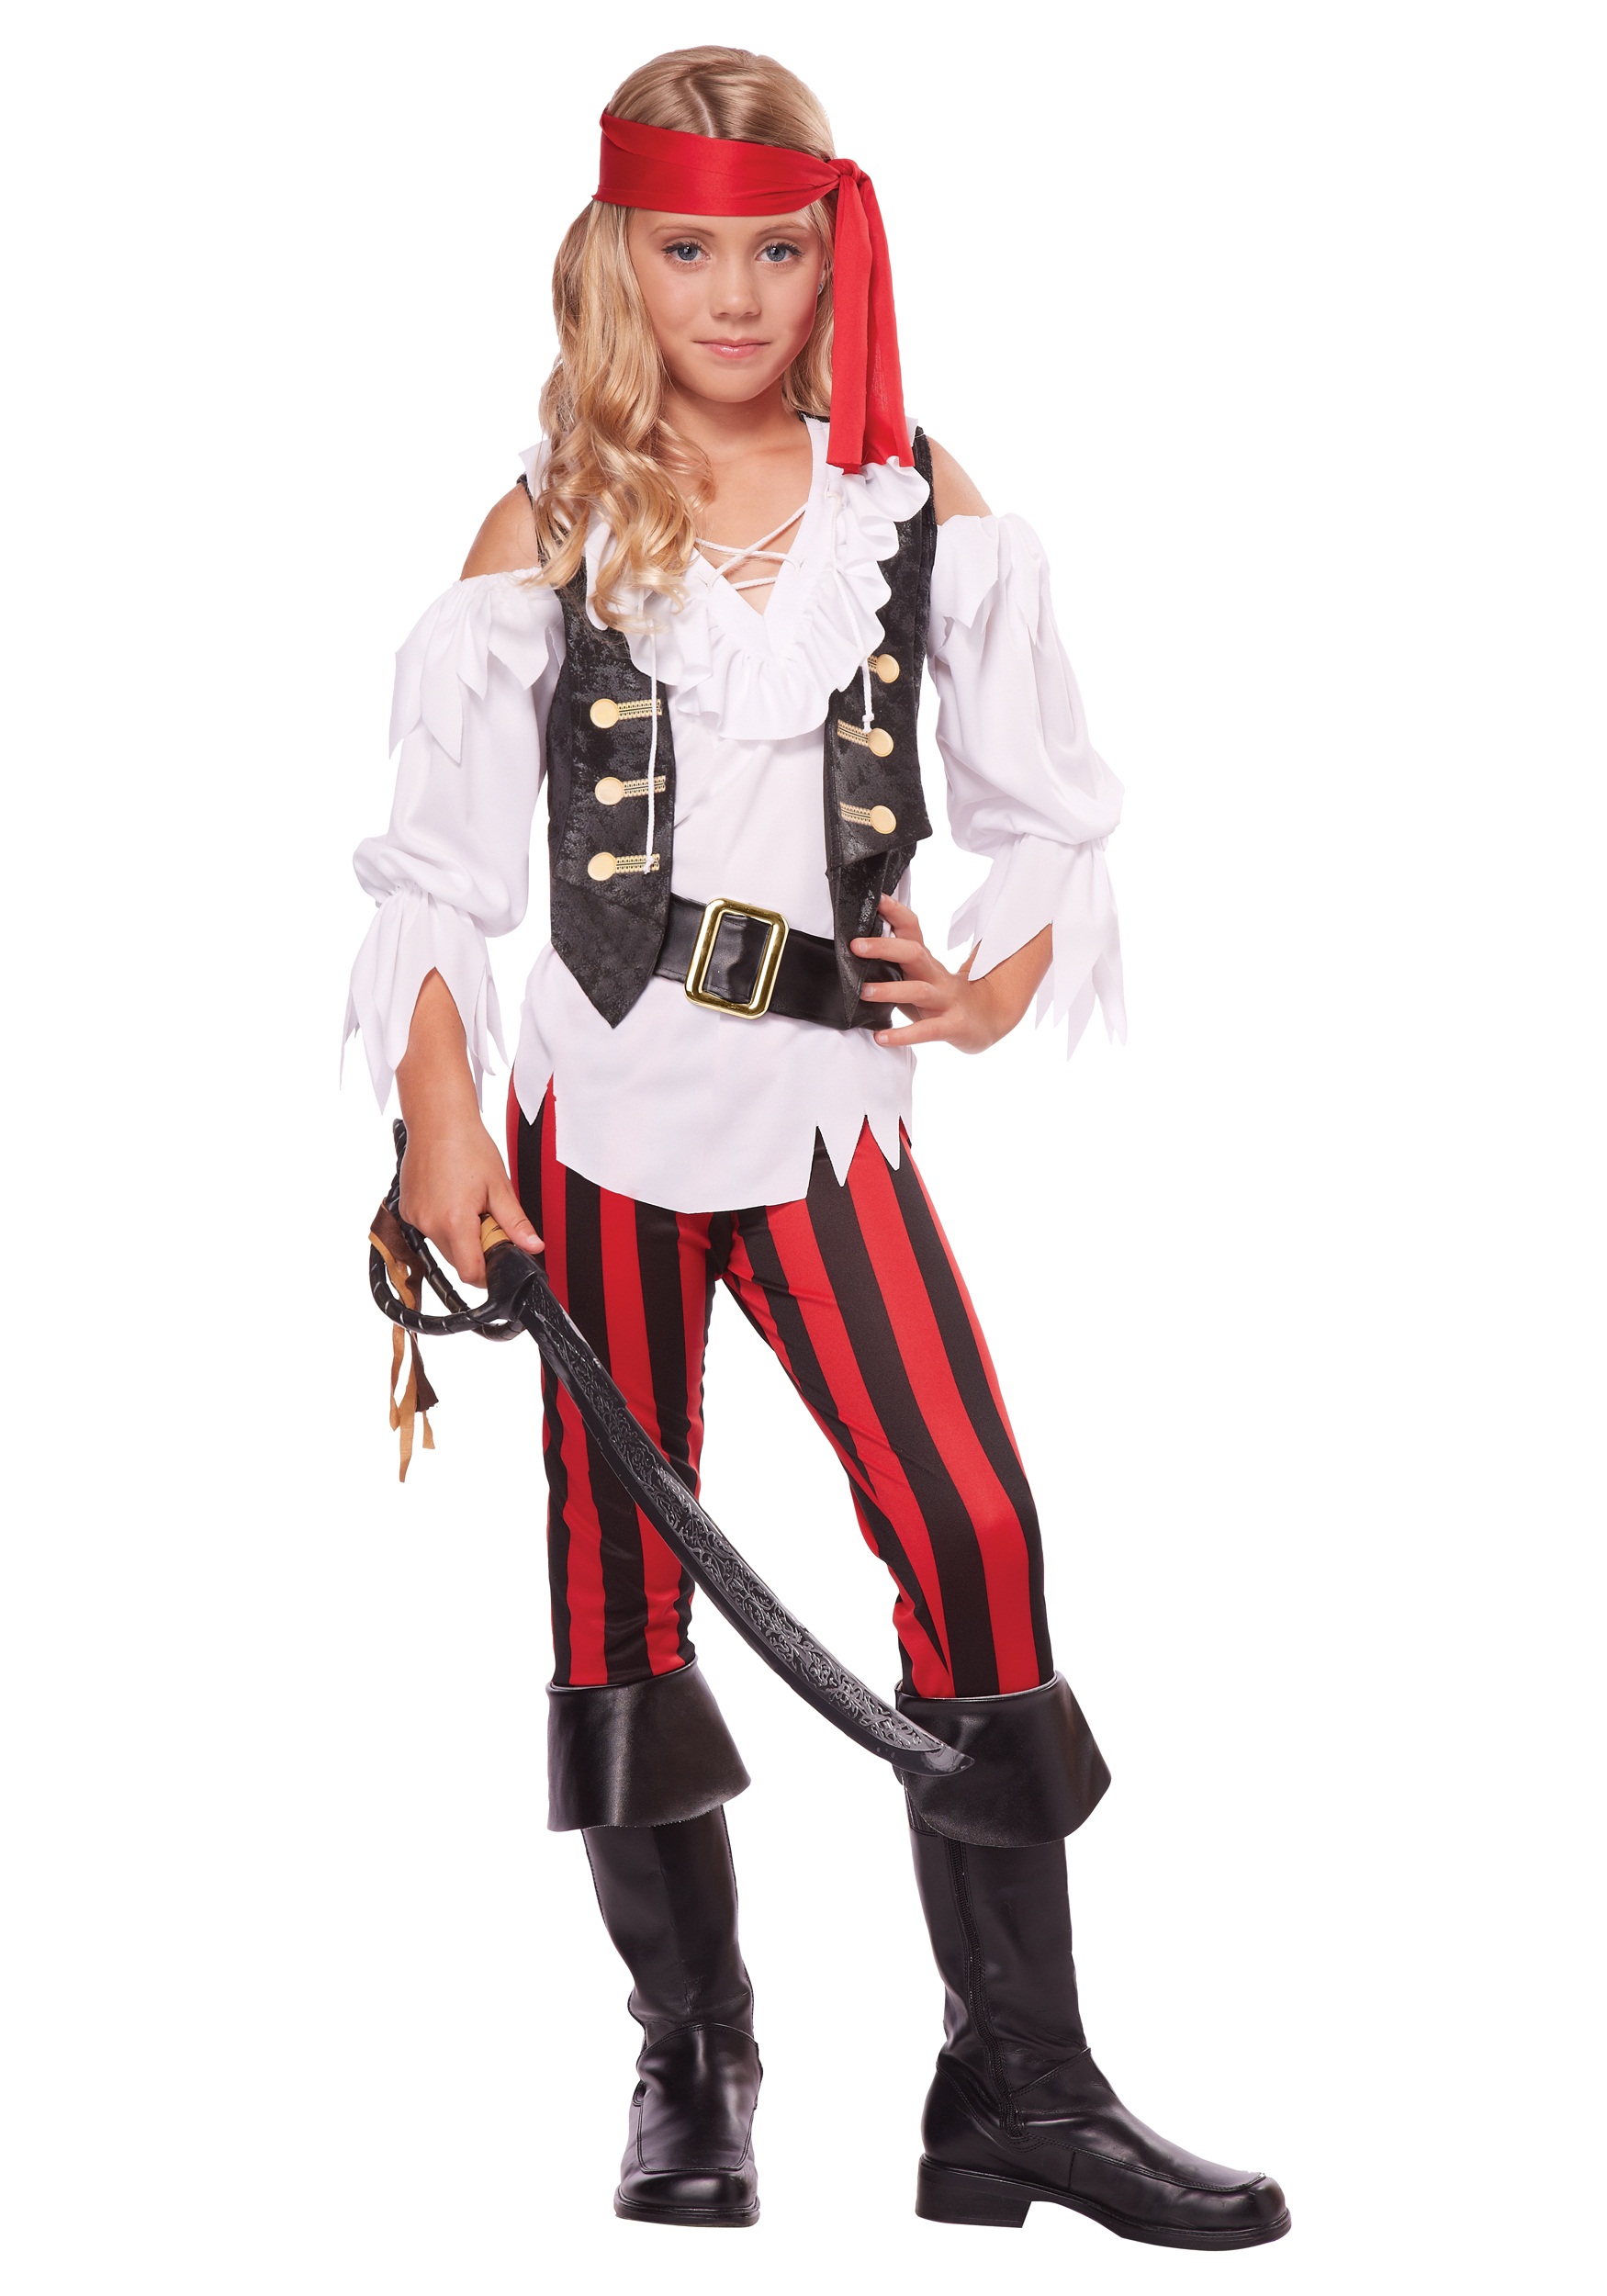 Photos - Fancy Dress California Costume Collection Posh Pirate Costume for Girls Black/Red& 